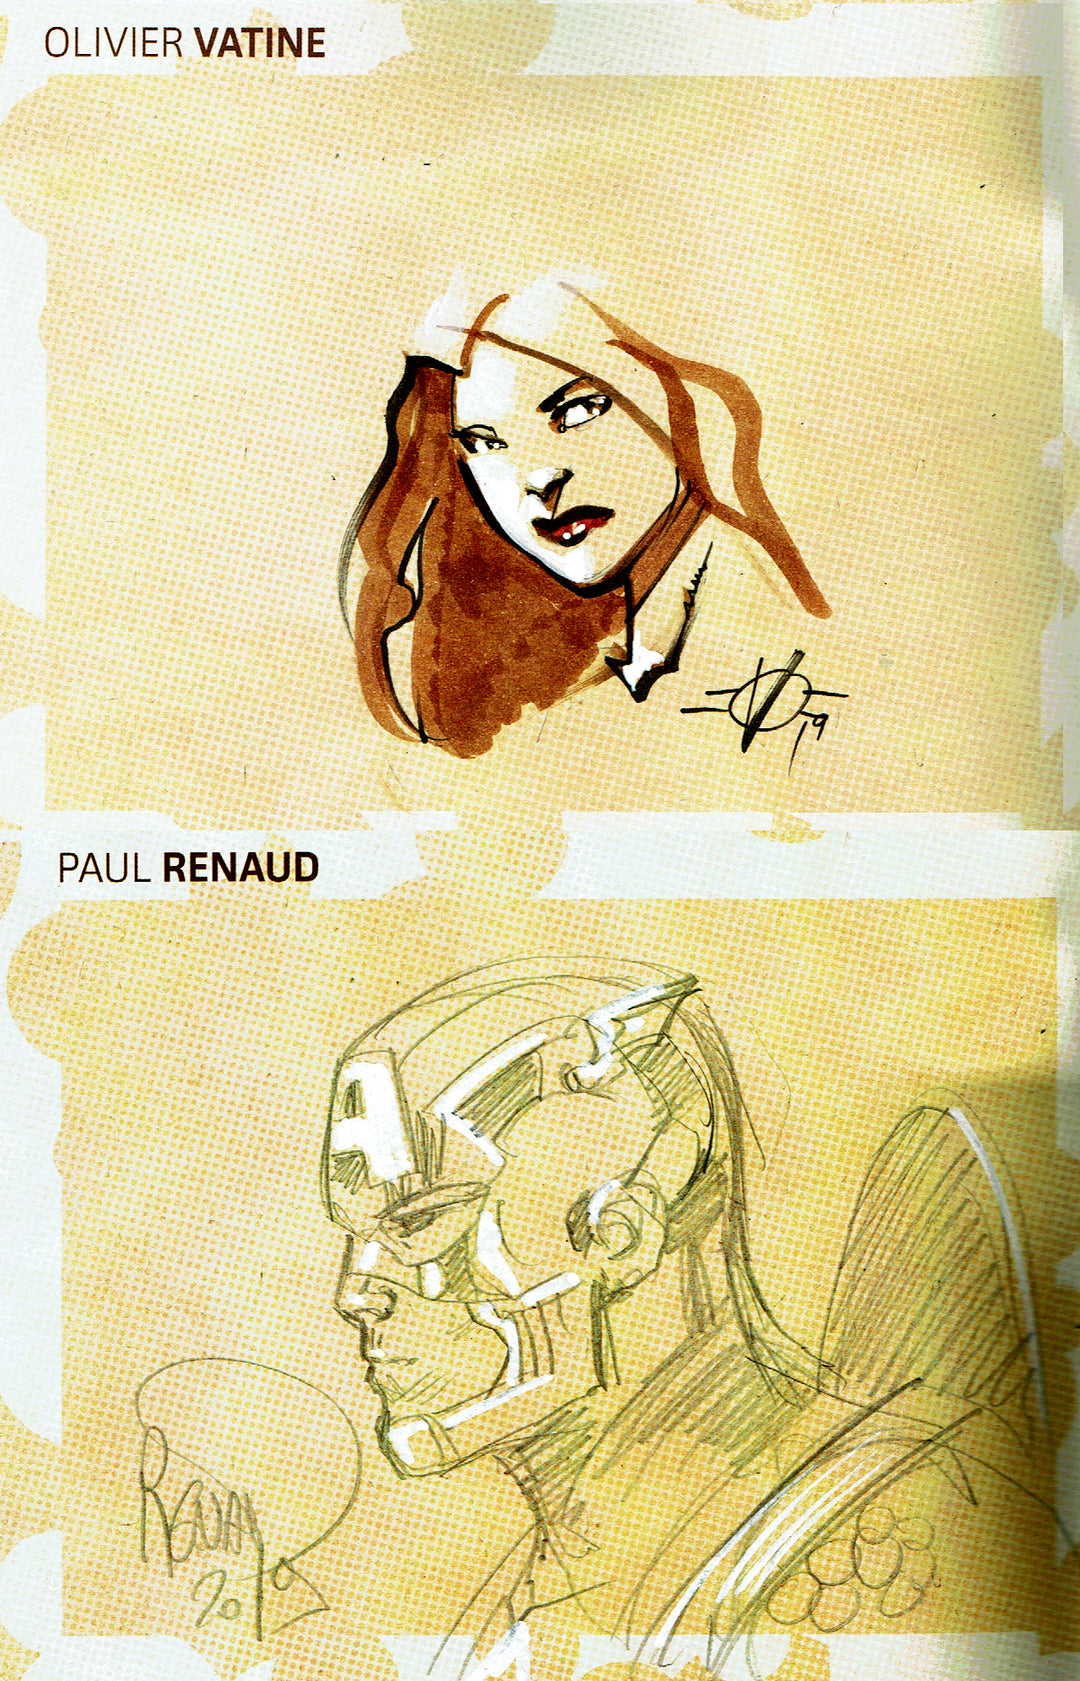 Double Feature #1: Paul Renaud/Olivier Vatine - Signed with Head Sketches by Both Artists [Set T]